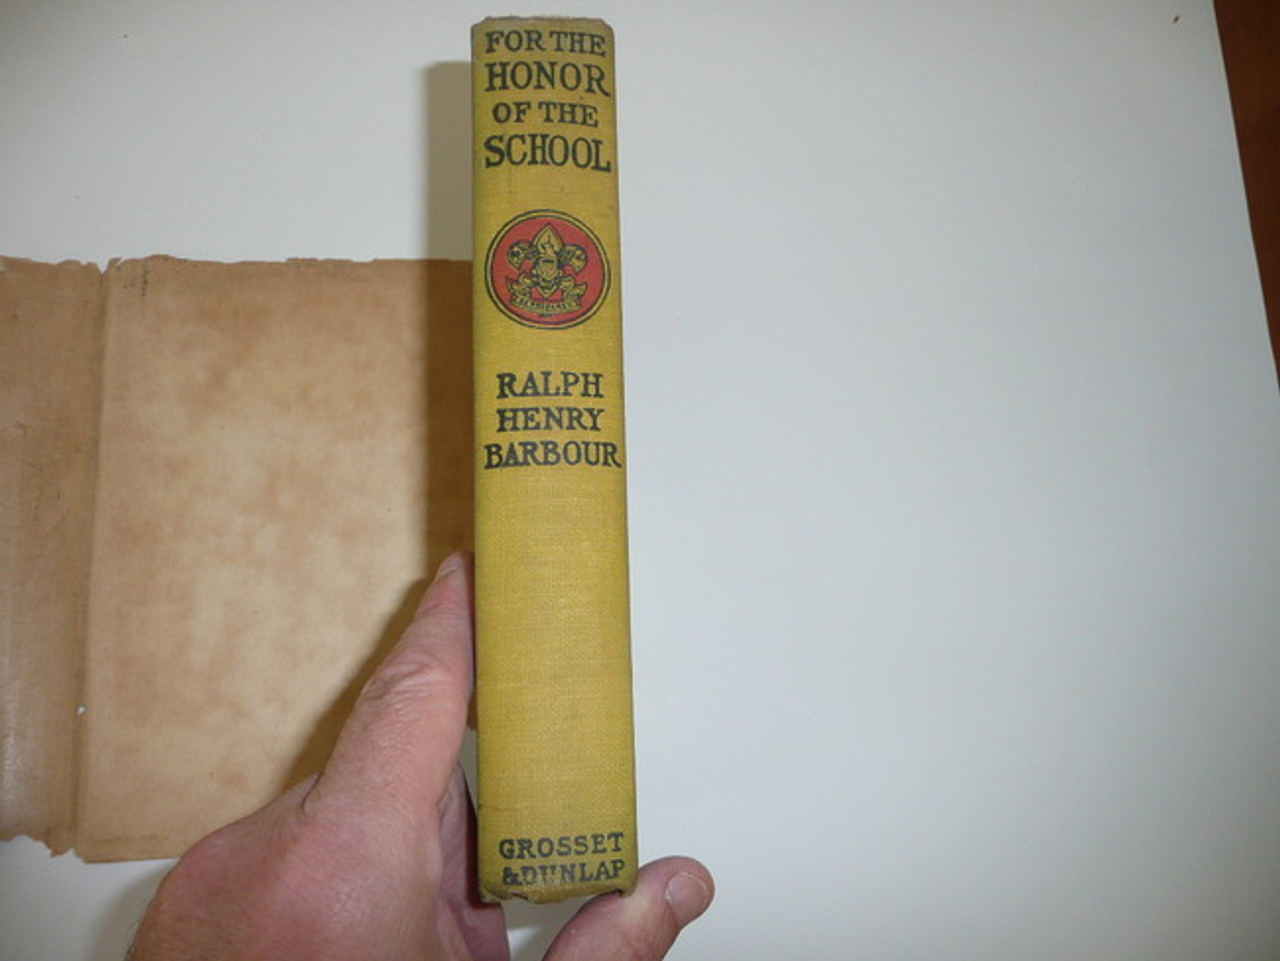 For the Honor of the School, By Ralph Henry Barbour, Every Boy's Library,  Type Two Binding, With Dust Jacket, Wear to Dust Jacket